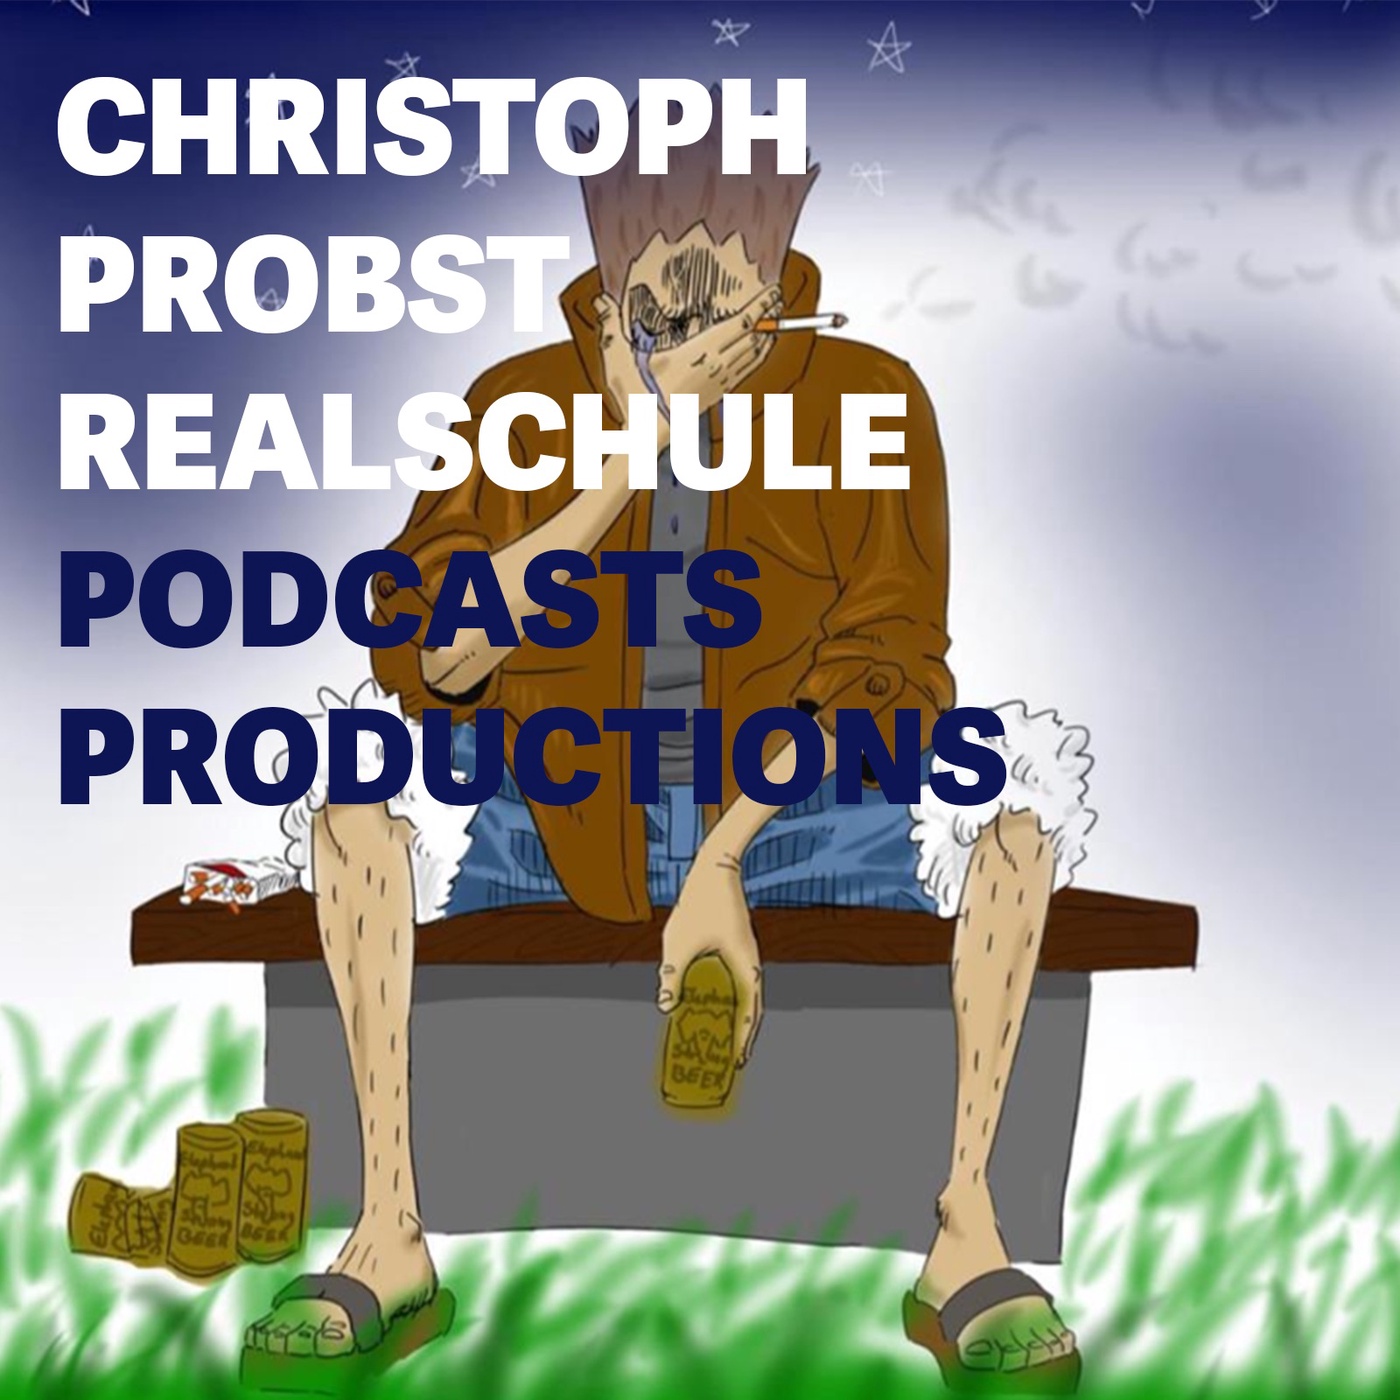 Christoph Probst Realschule Podcast Productions